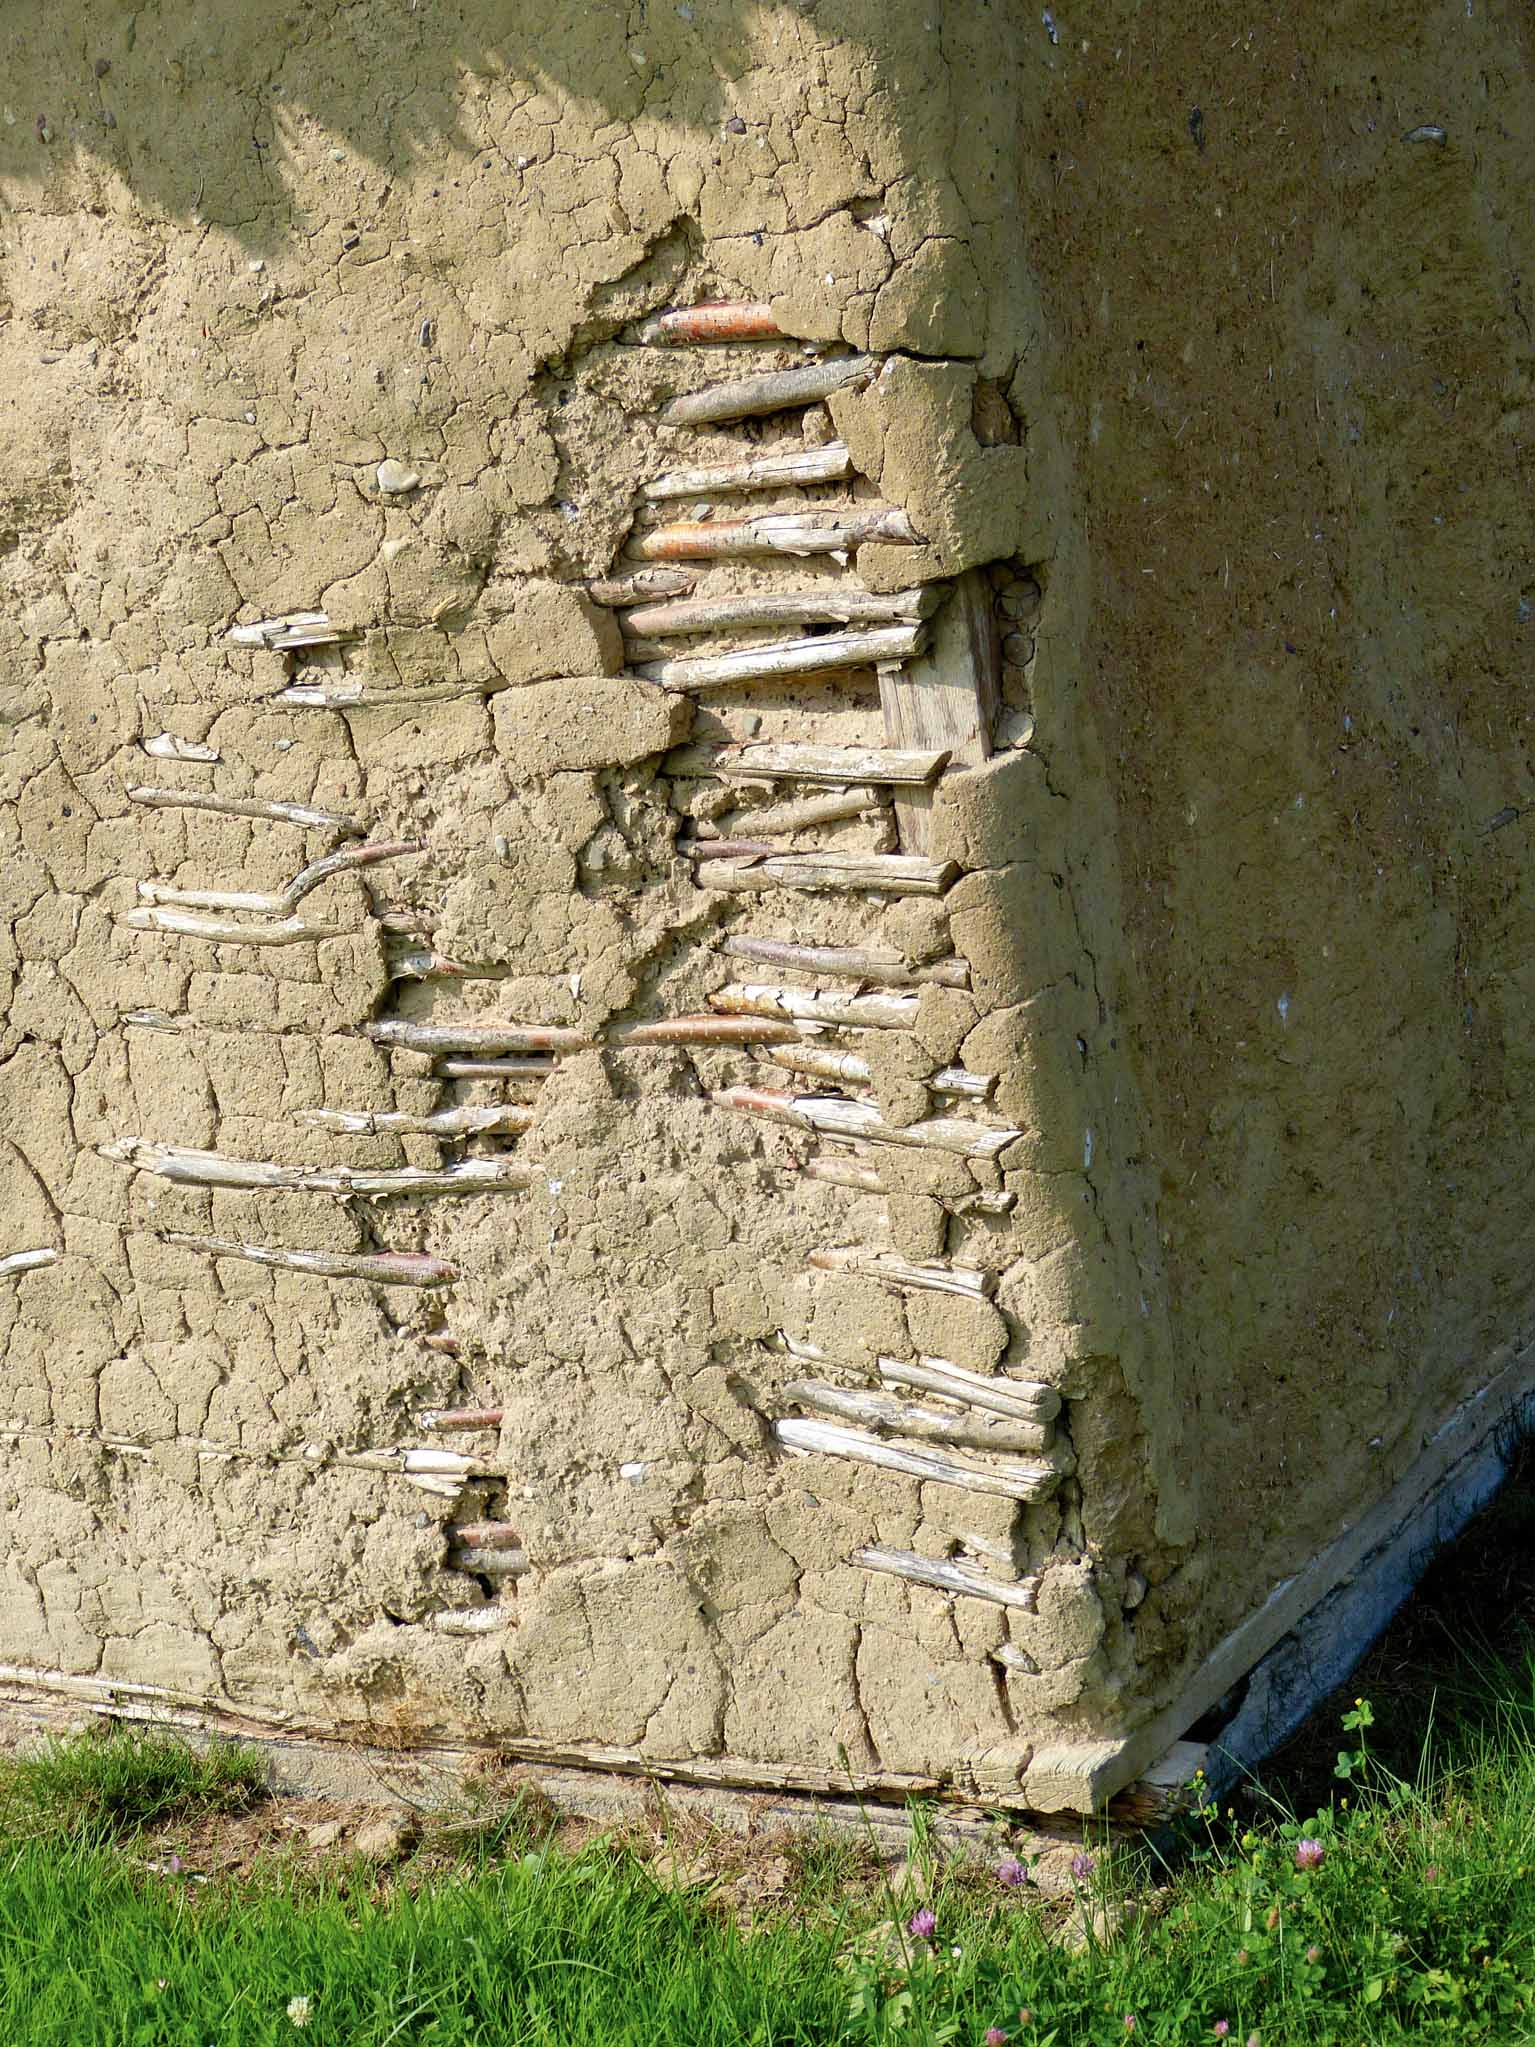 A wattle and daub wall still standing in northern Germany after 1100 years.